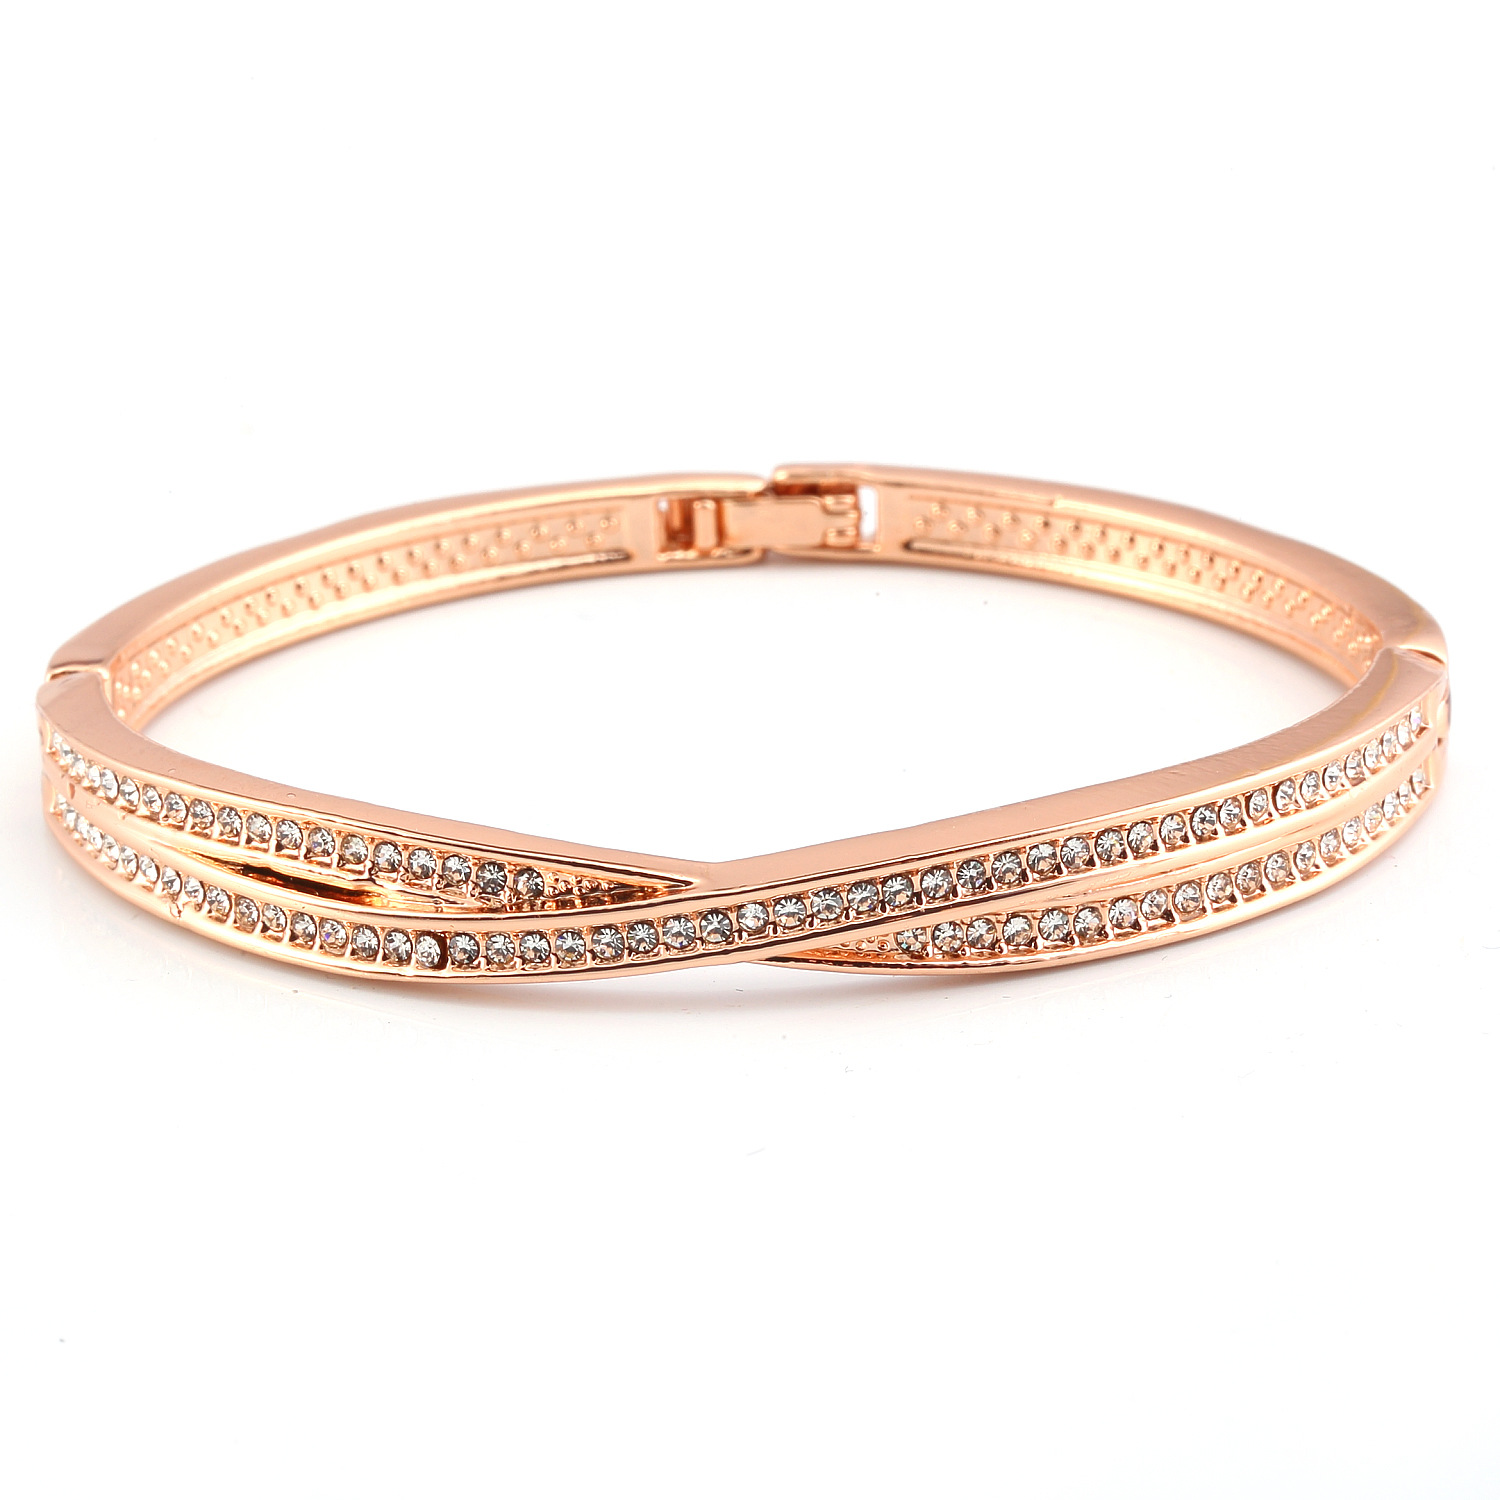 2:rose gold plated